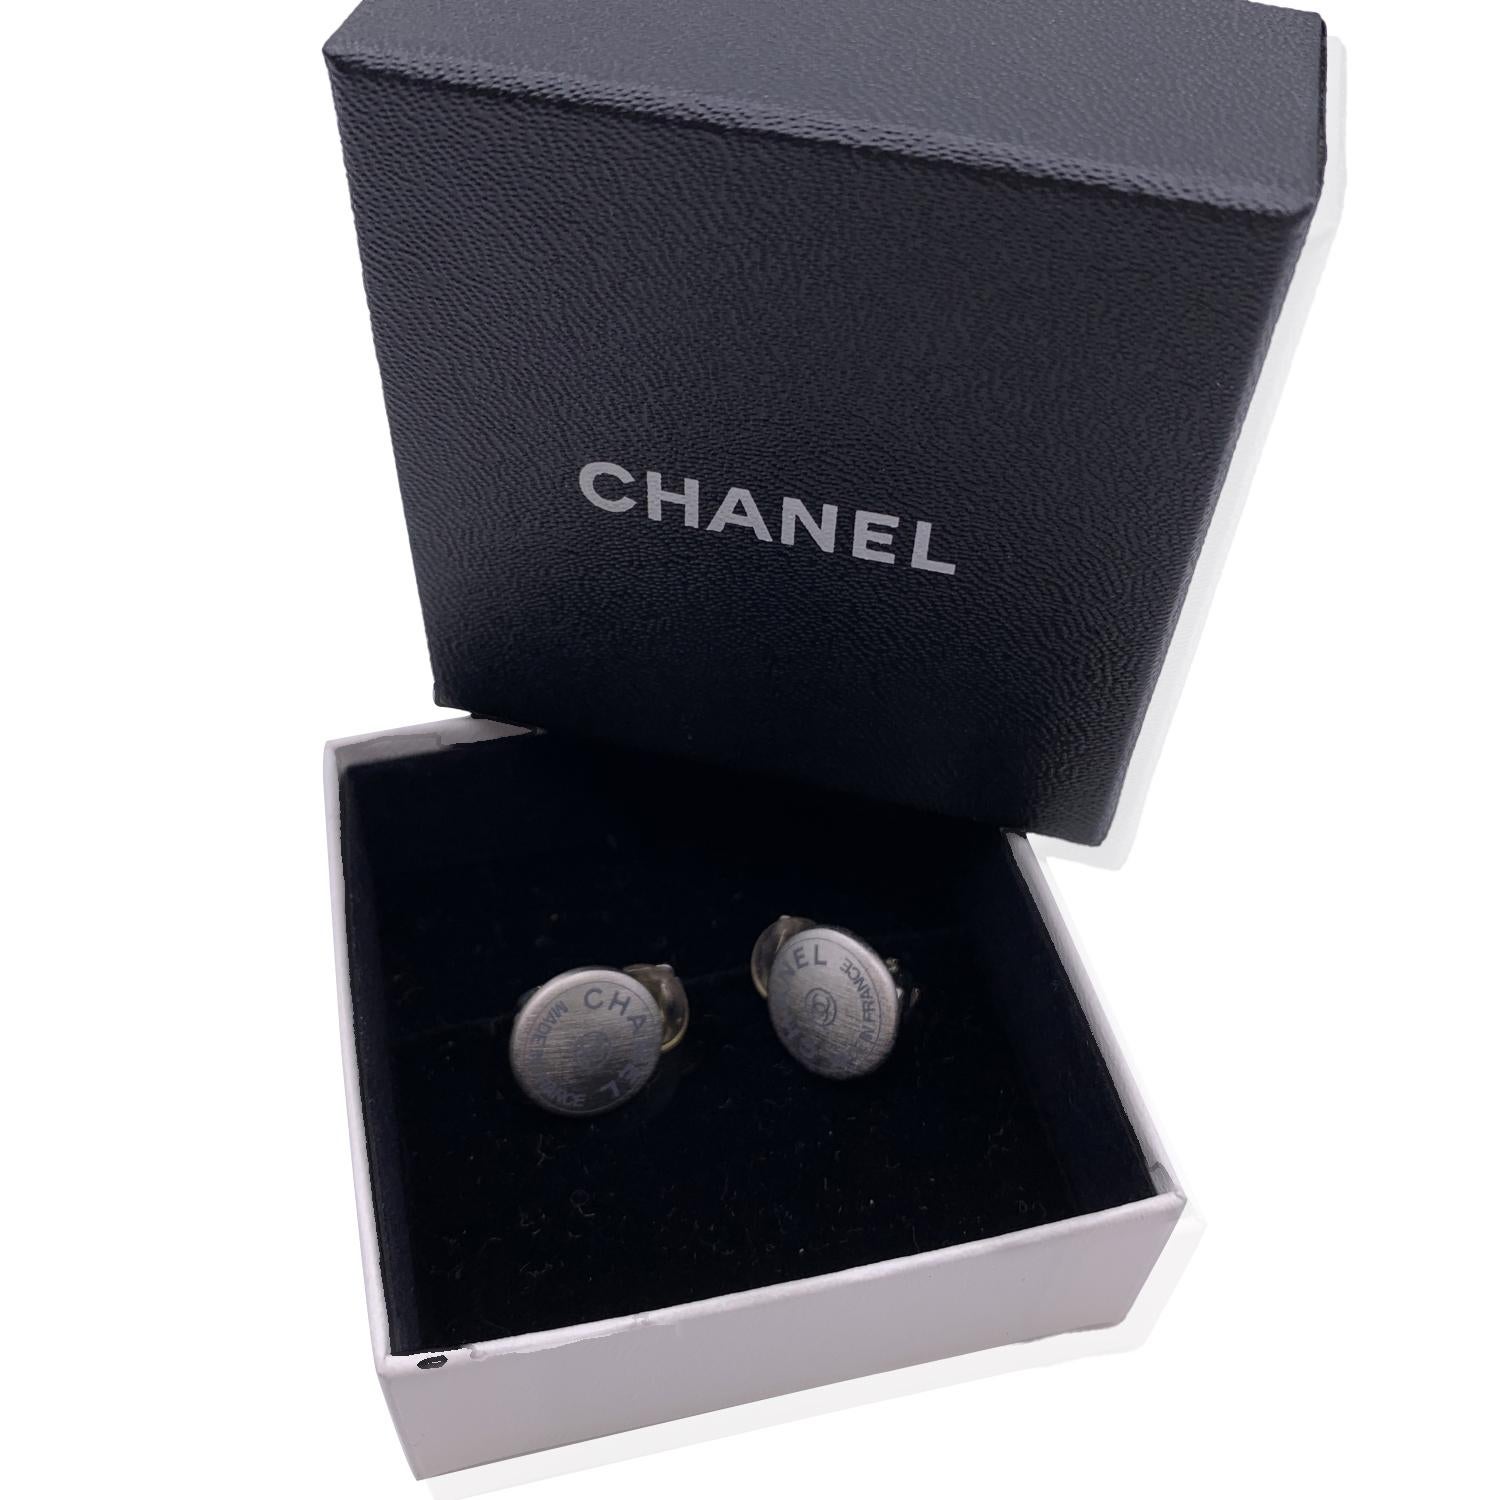 Gorgeous vintage CHANEL silver metal small round studs earrings. 'Chanel - CC -Made in France' writing on each earrings. Clip-on earrings. Signed 'Chanel - 99 CC A - Made in France' oval hallmark on the reverse of the earring. Diameter: 14